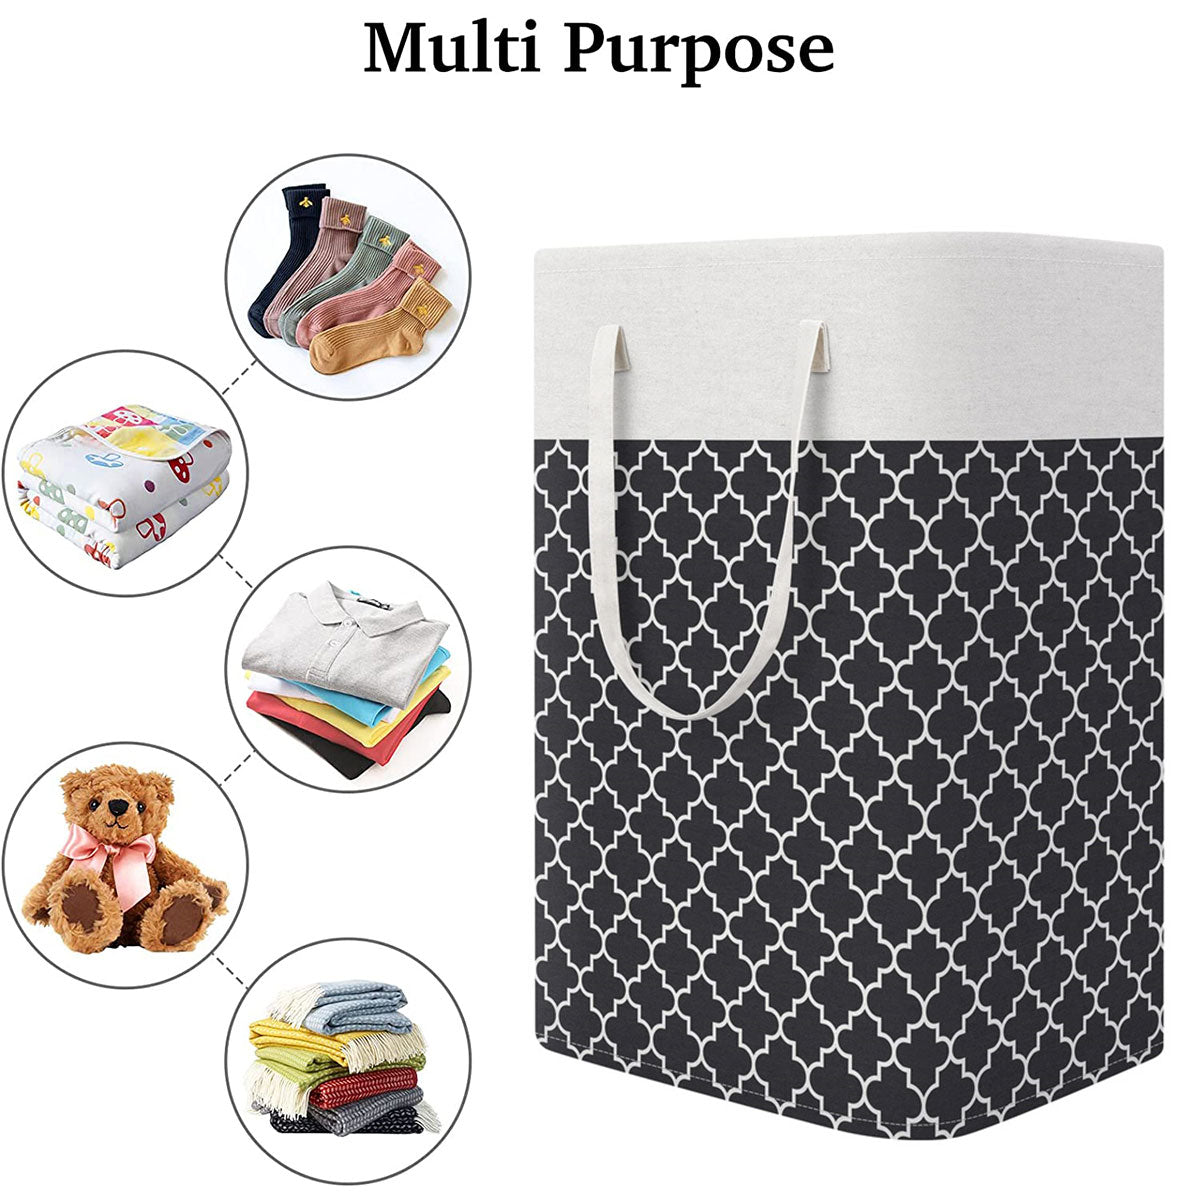 Large Capacity Laundry Basket With Handles